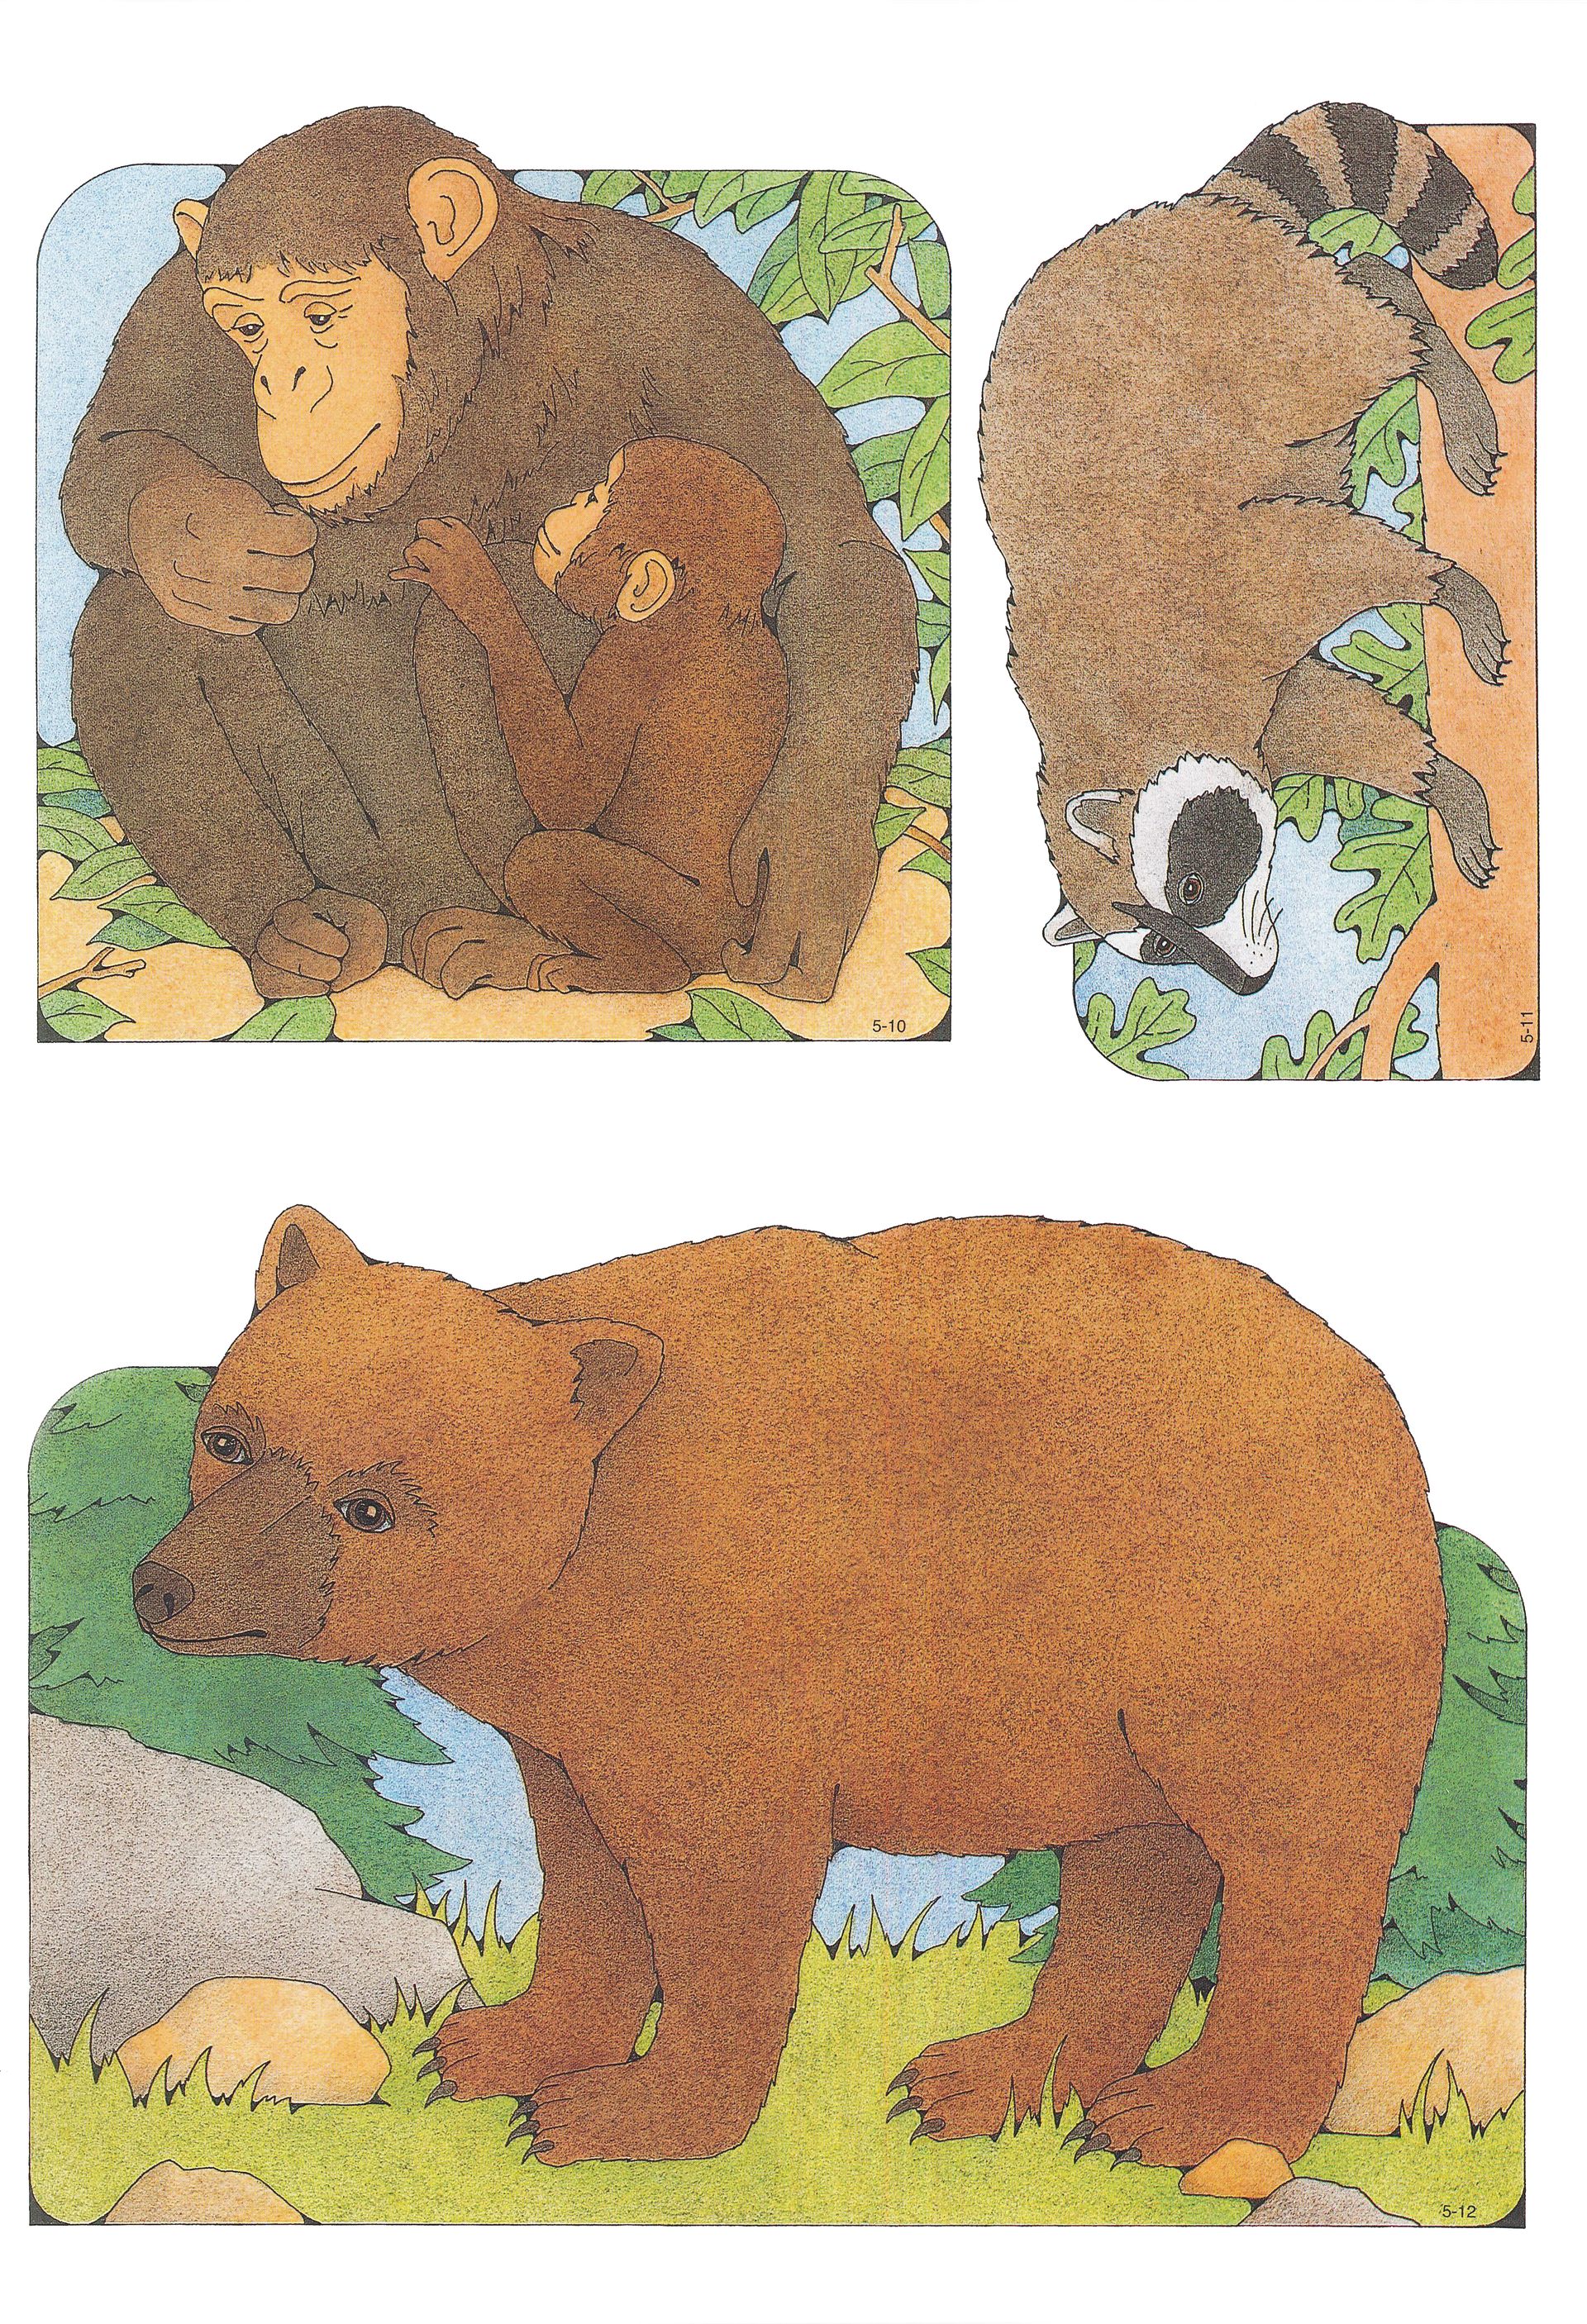 Primary Visual Aids: Cutouts 5-10, Mother and Baby Chimpanzee; 5-11, Raccoon; 5-12, Bear.